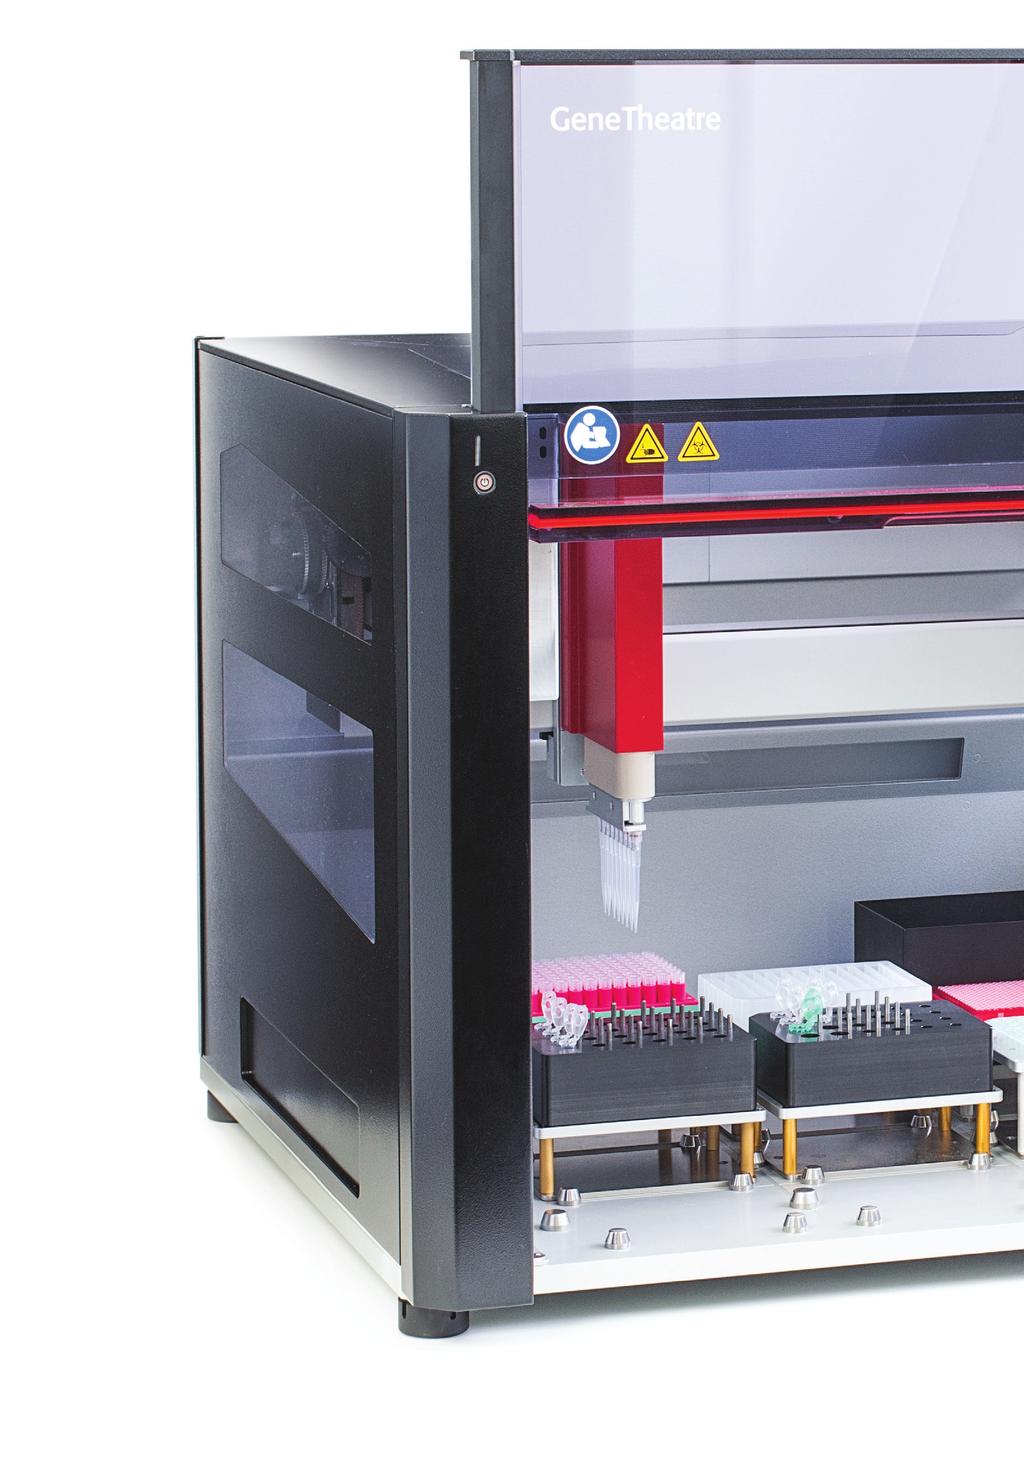 2 GeneTheatre Automated pipetting routines: easy and fast. The use of the GeneTheatre greatly simplifies all pipetting routines within the low to medium throughput range via disposable tips.